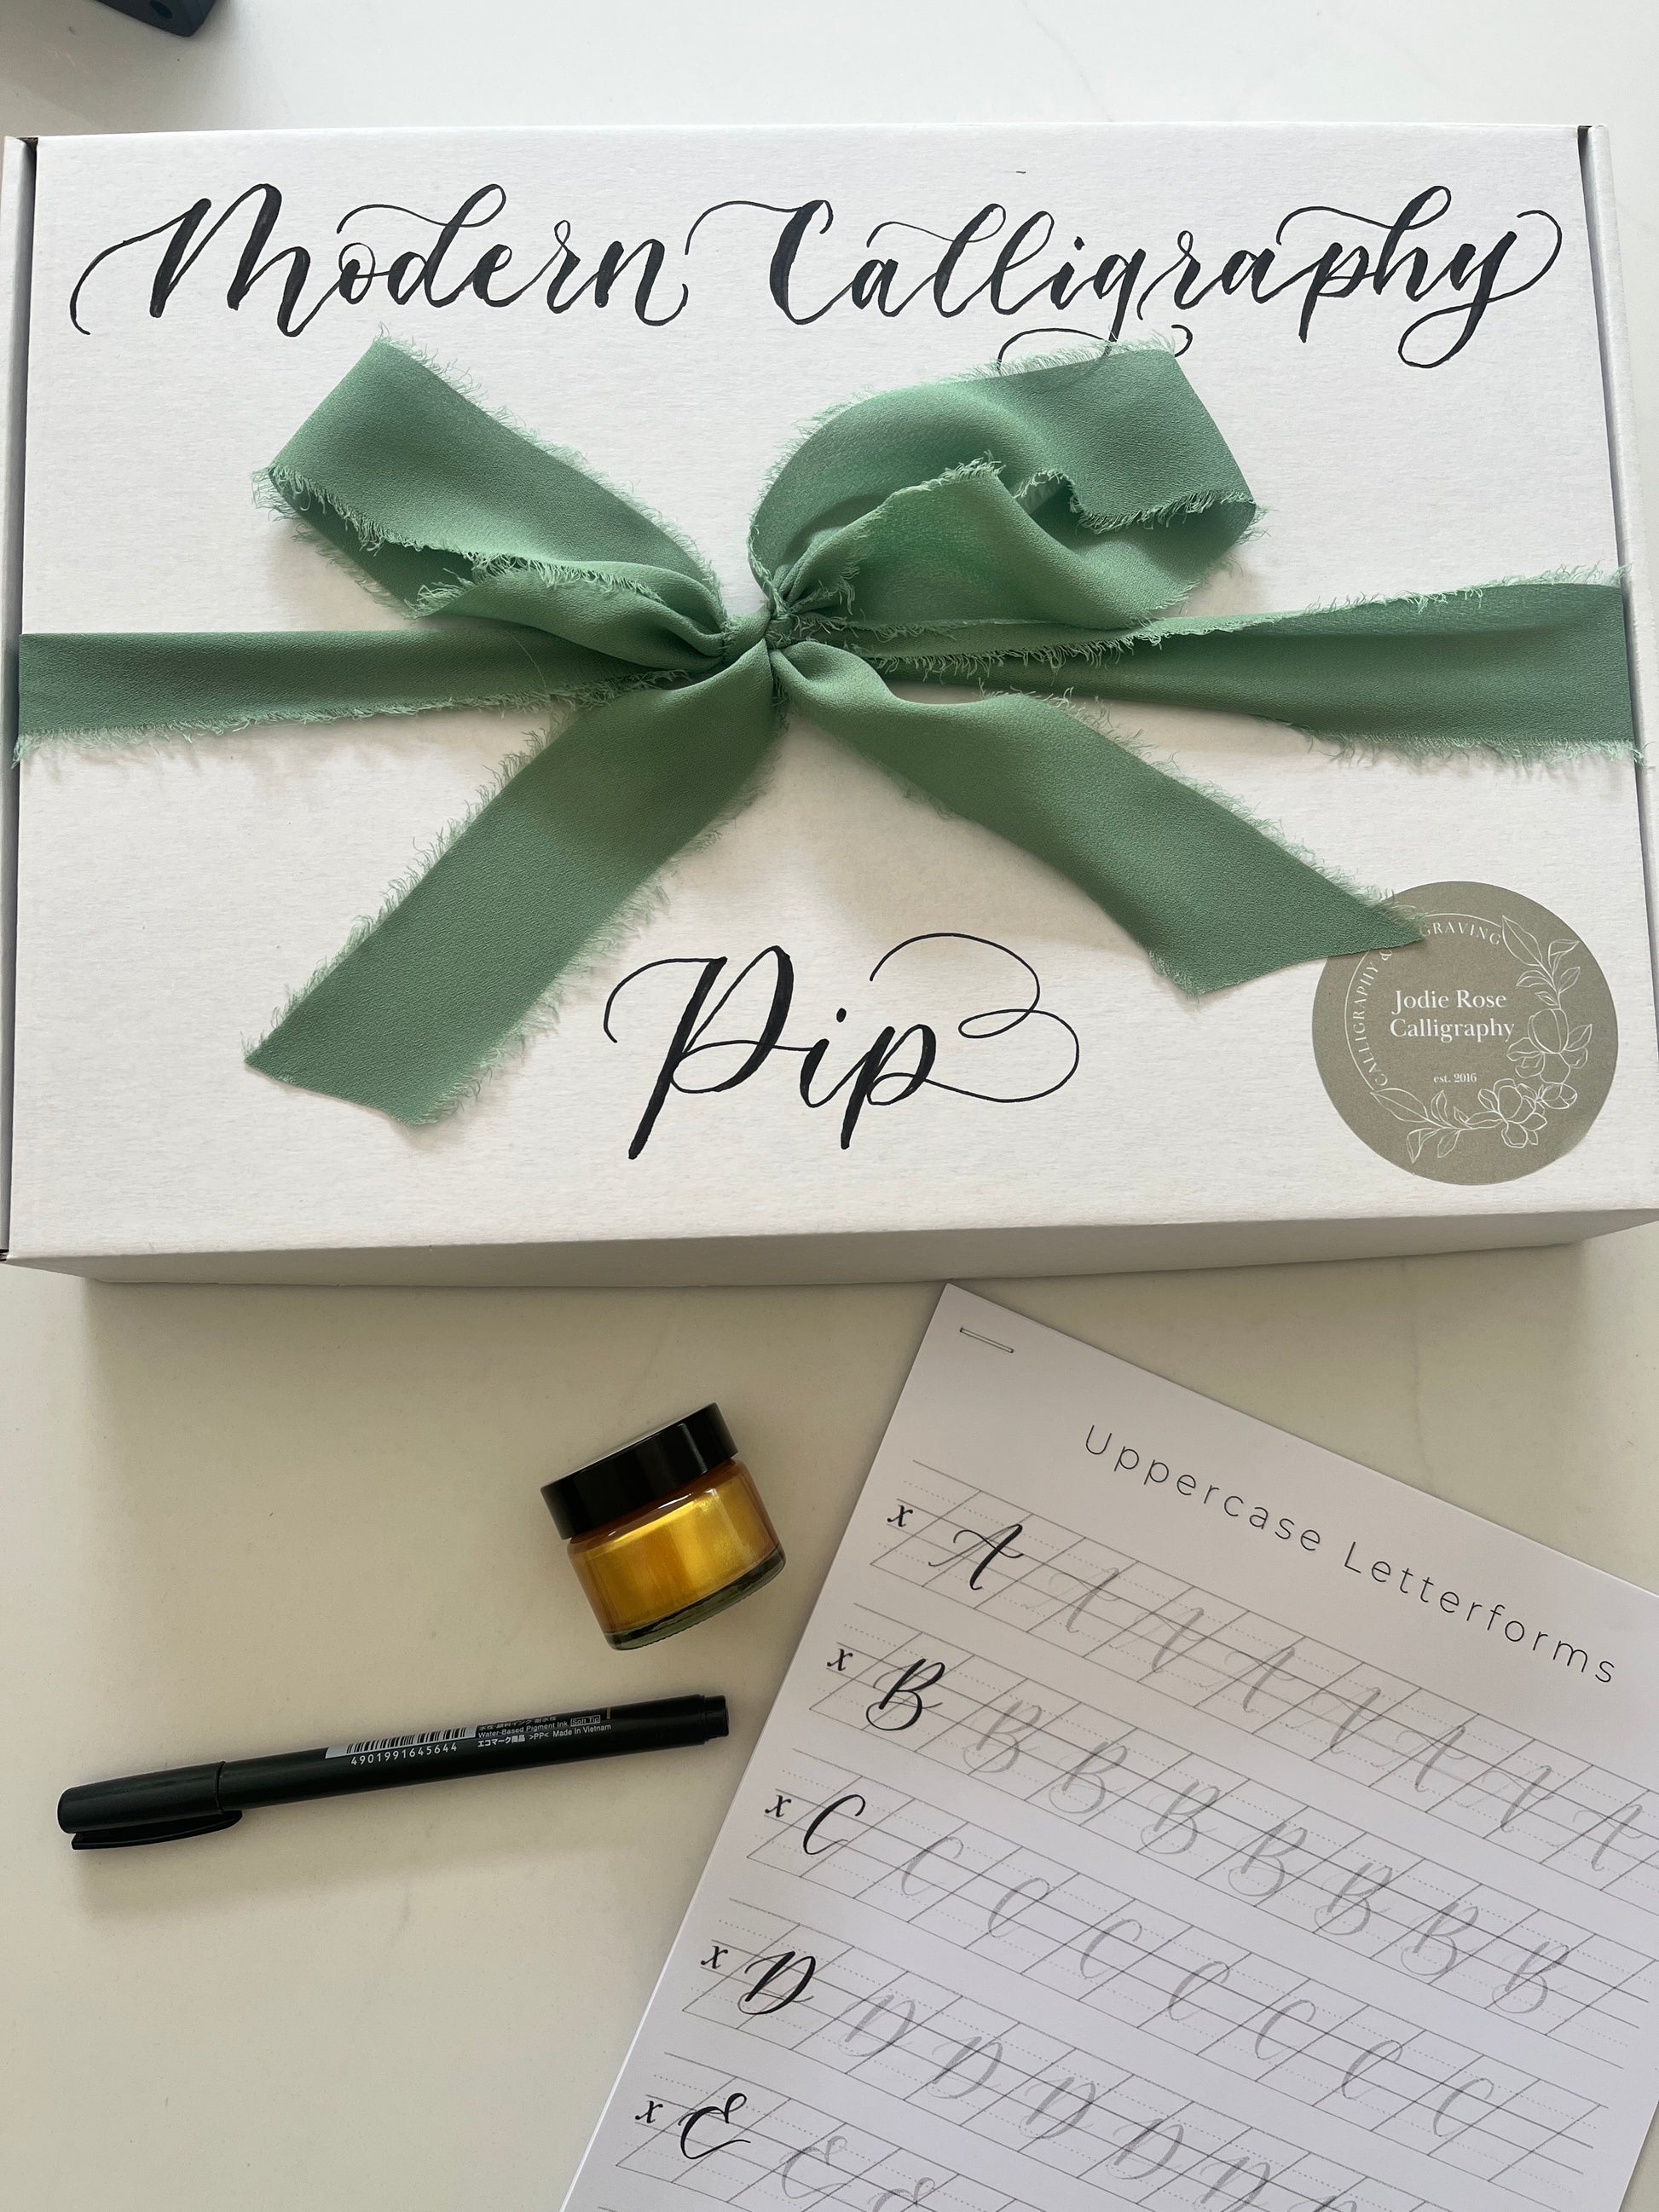 Modern Calligraphy Kit for Beginners - Complete Starter Set with calligraphy pen holder, nib, Ink, and Instructional Guided worksheets